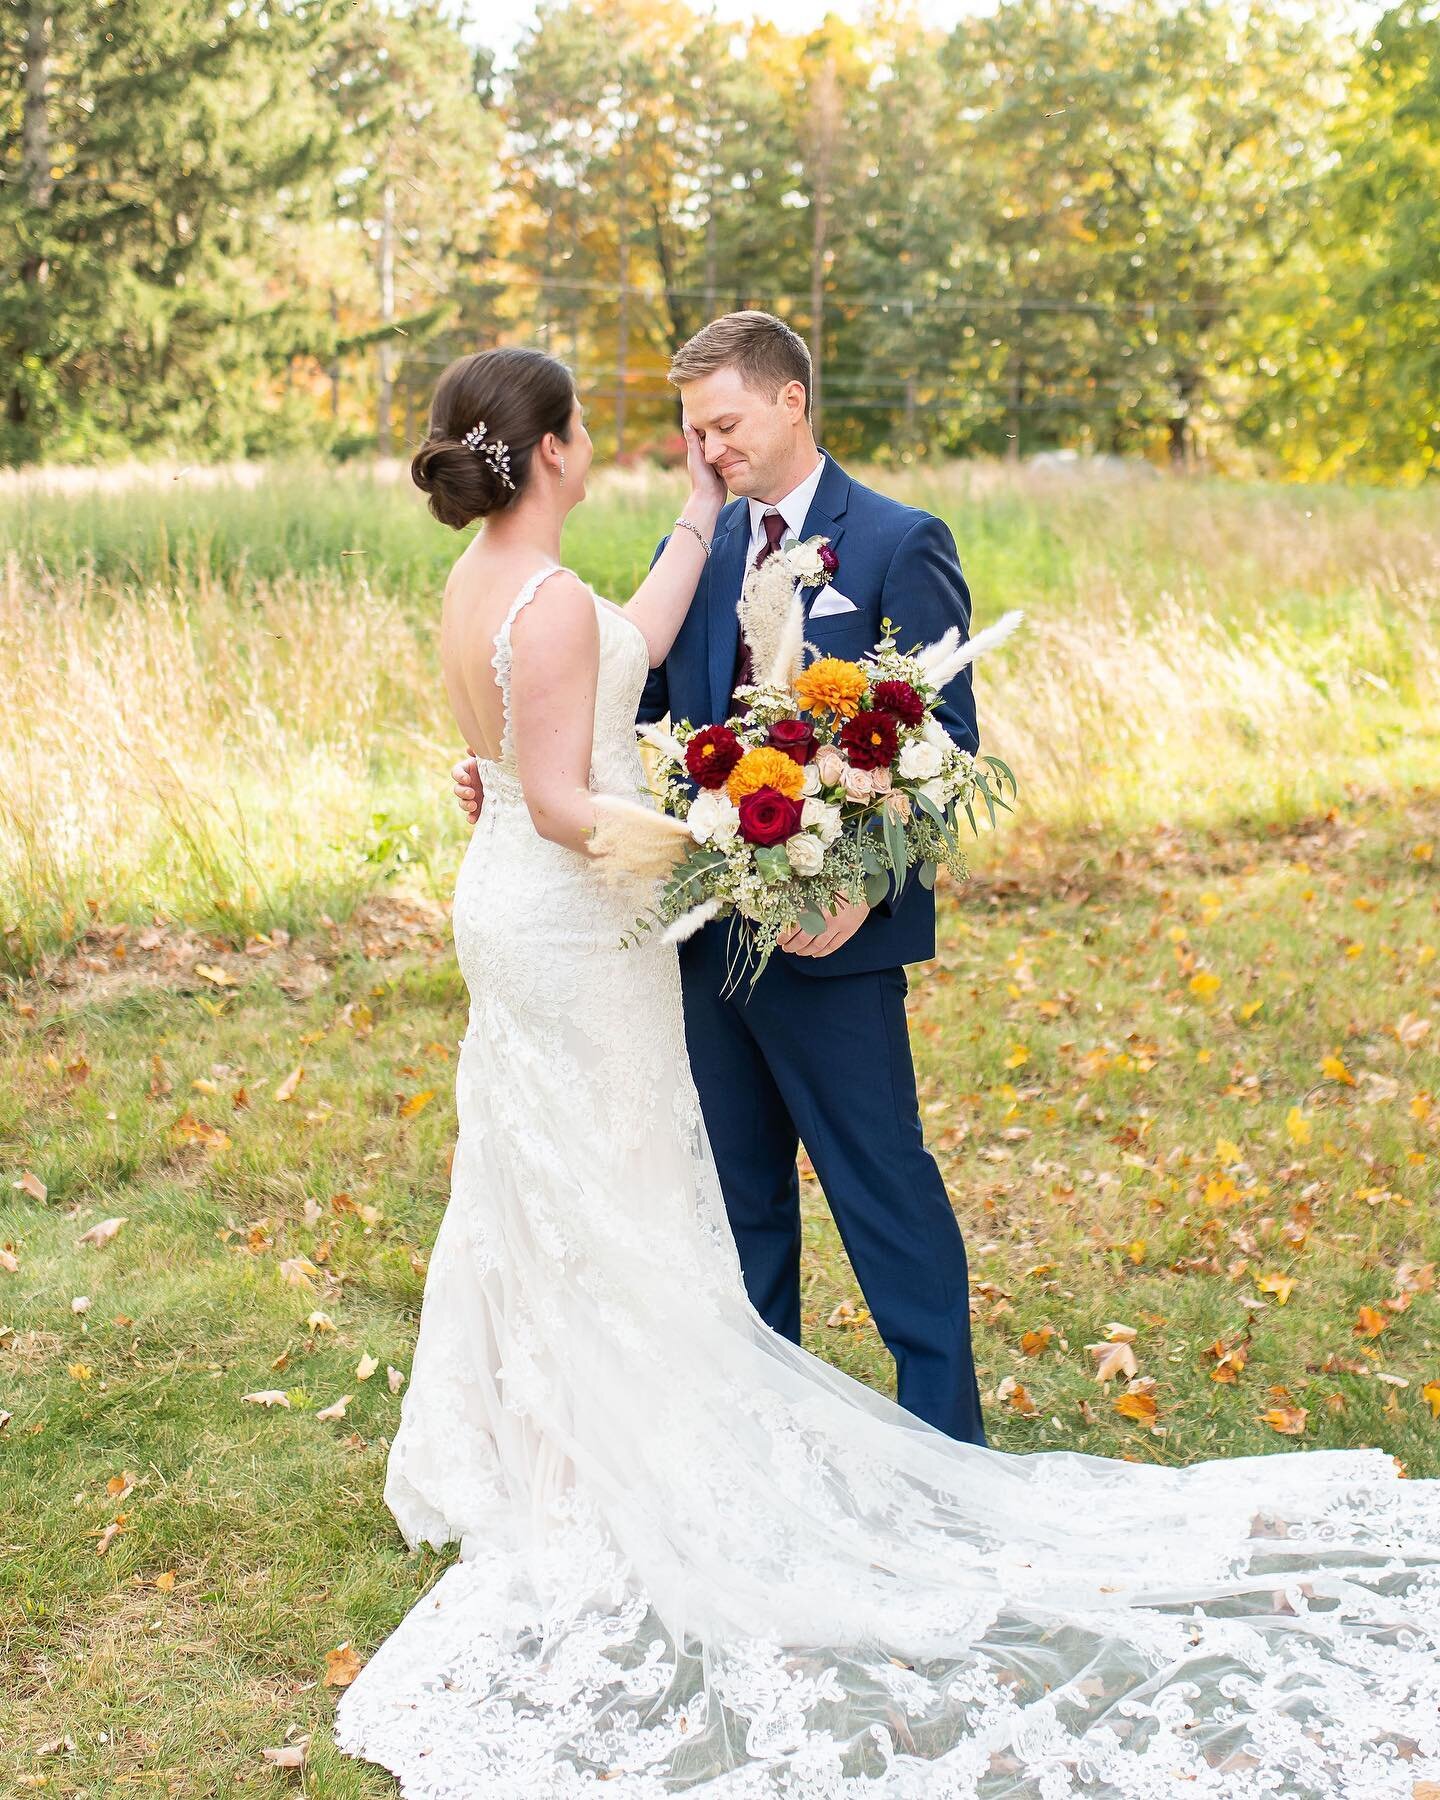 Happy first anniversary to J+J! A beautiful couple and fall wedding to remember 🍂
.
📸 @jesssinatraphoto